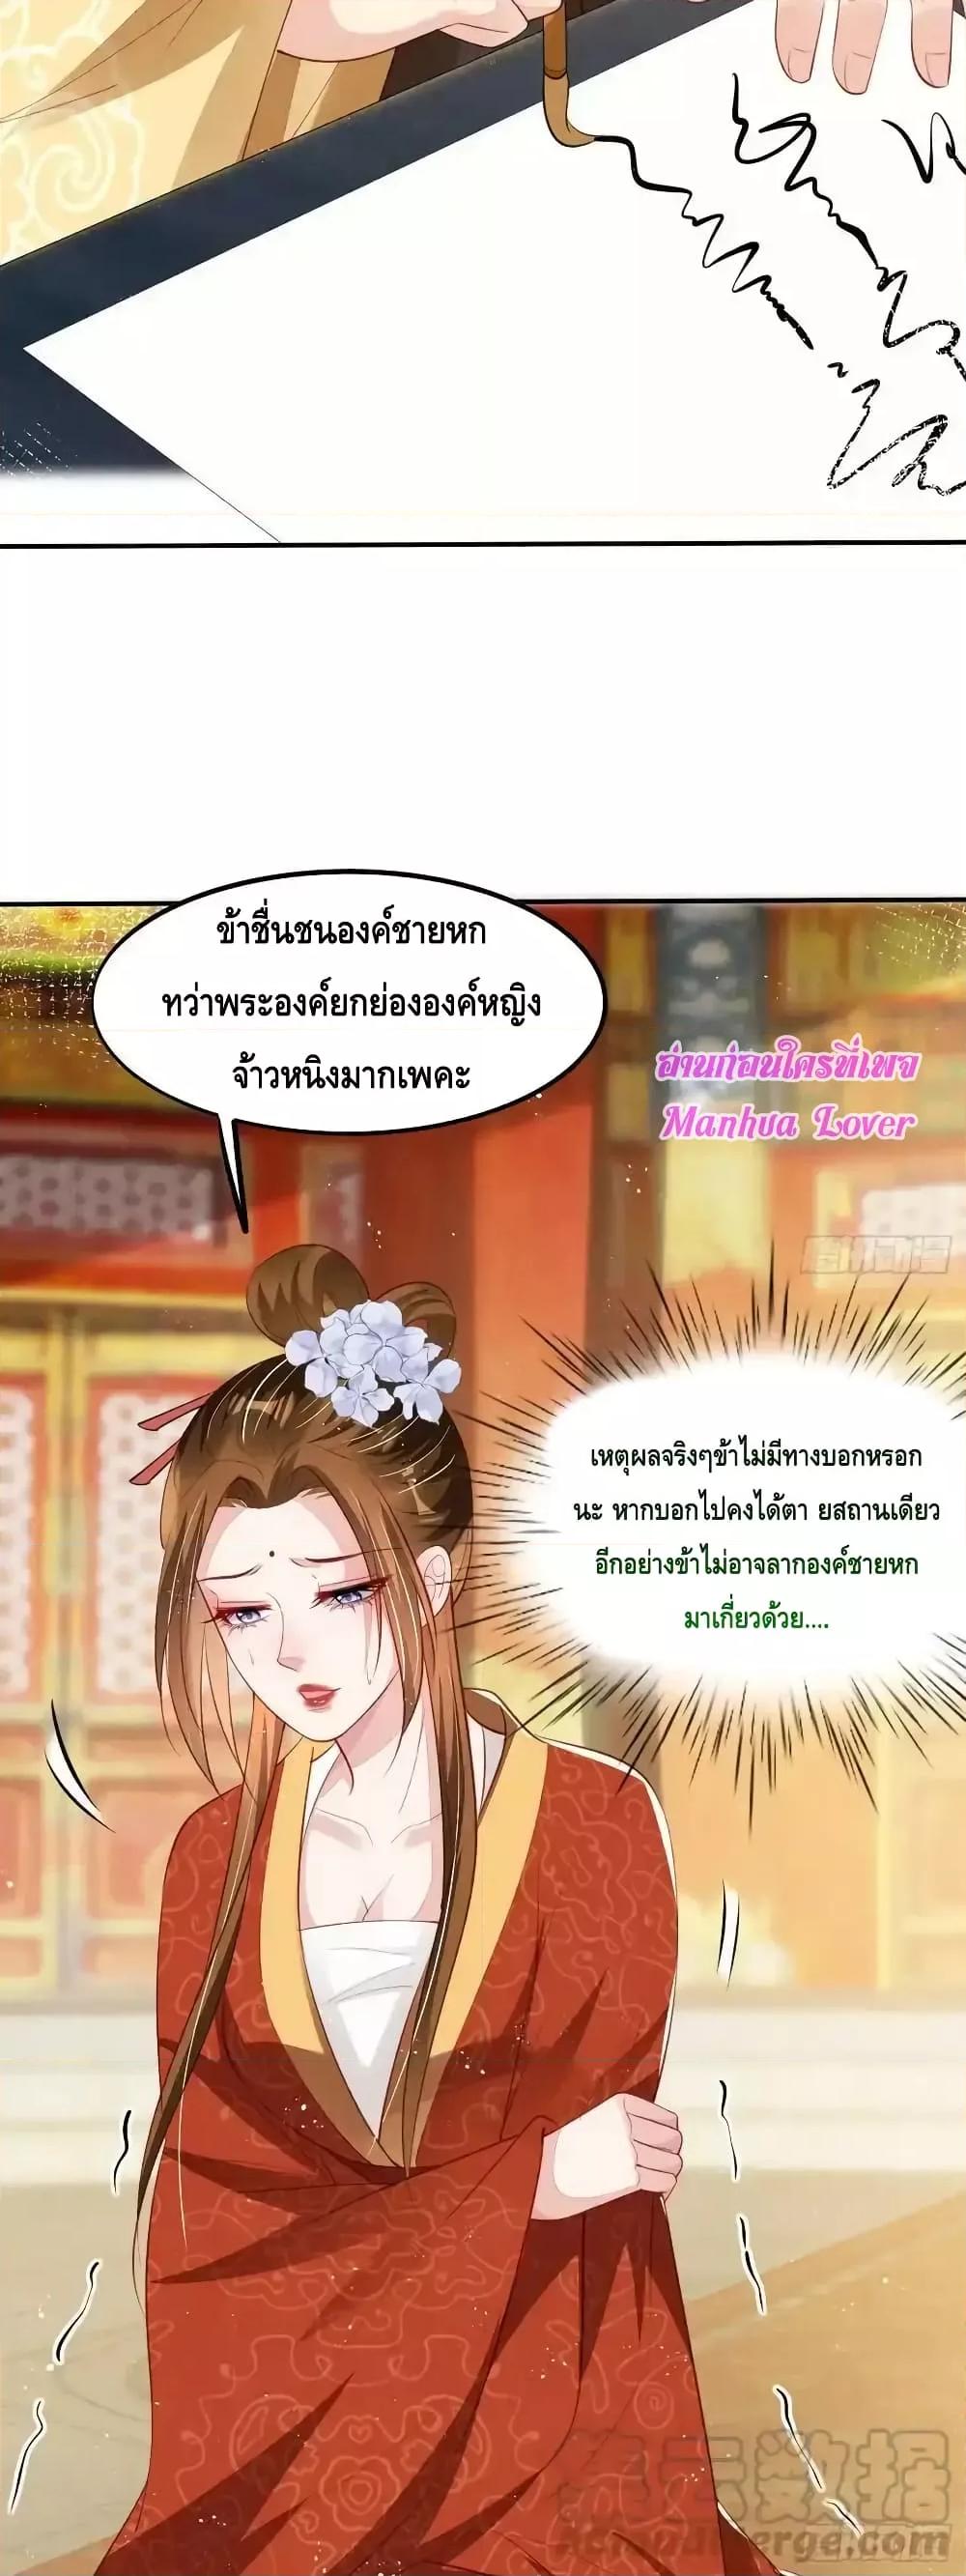 After I Bloom, a Hundred Flowers Will ill – ดอกไม้นับ ตอนที่ 70 (11)